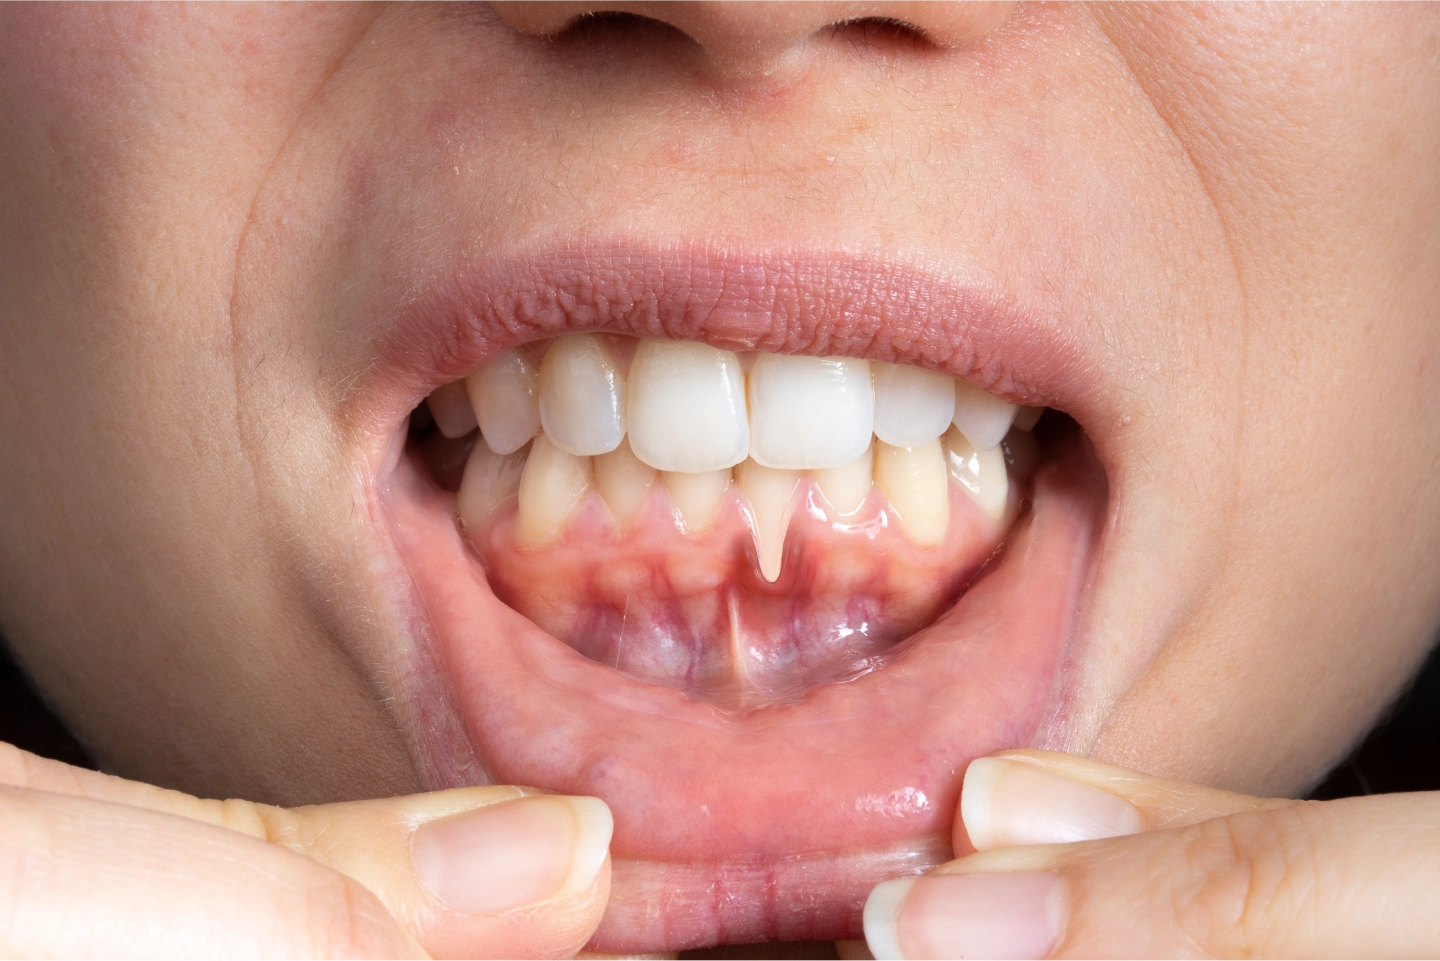 What Can Happen If My Gum Disease Is Left Untreated?